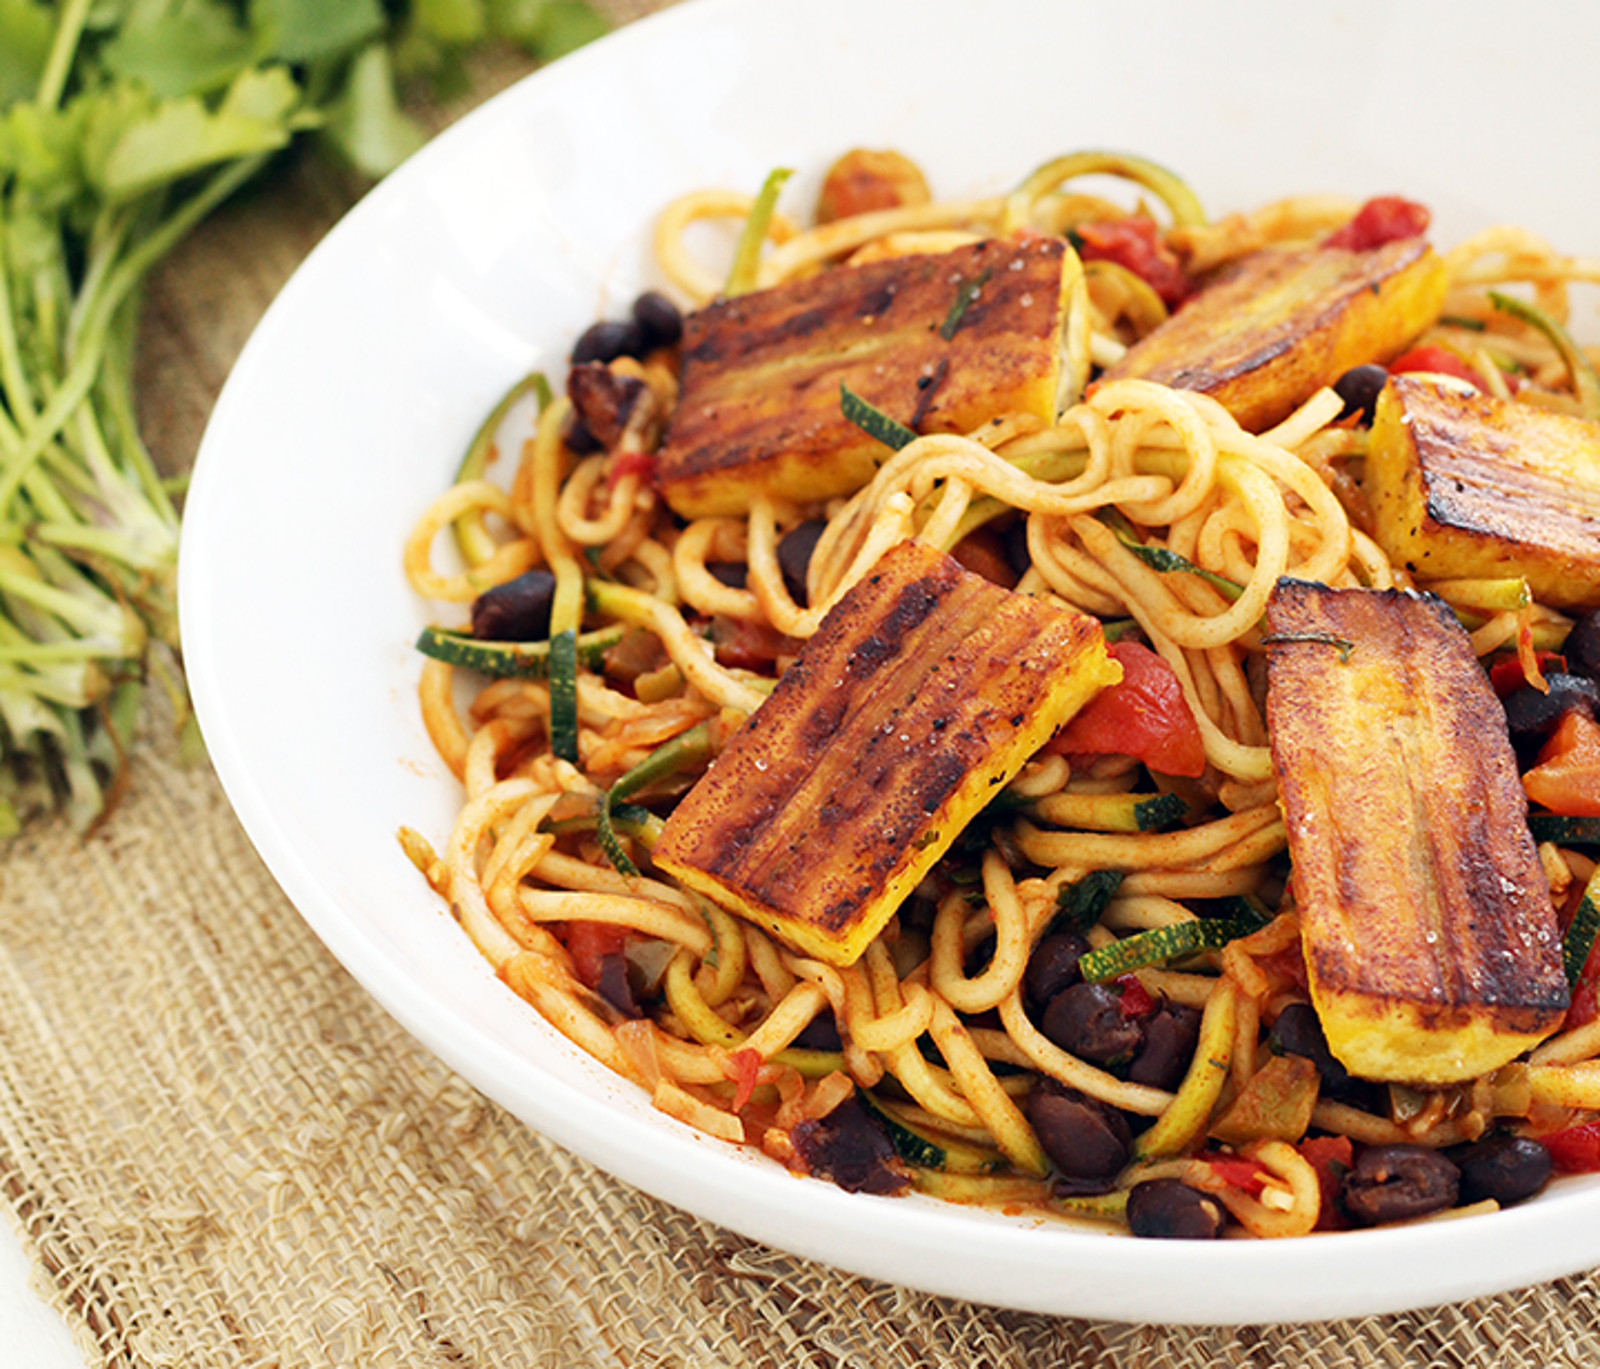 Sofrito Zucchini Pasta With Beans and Lightly Fried Plantains